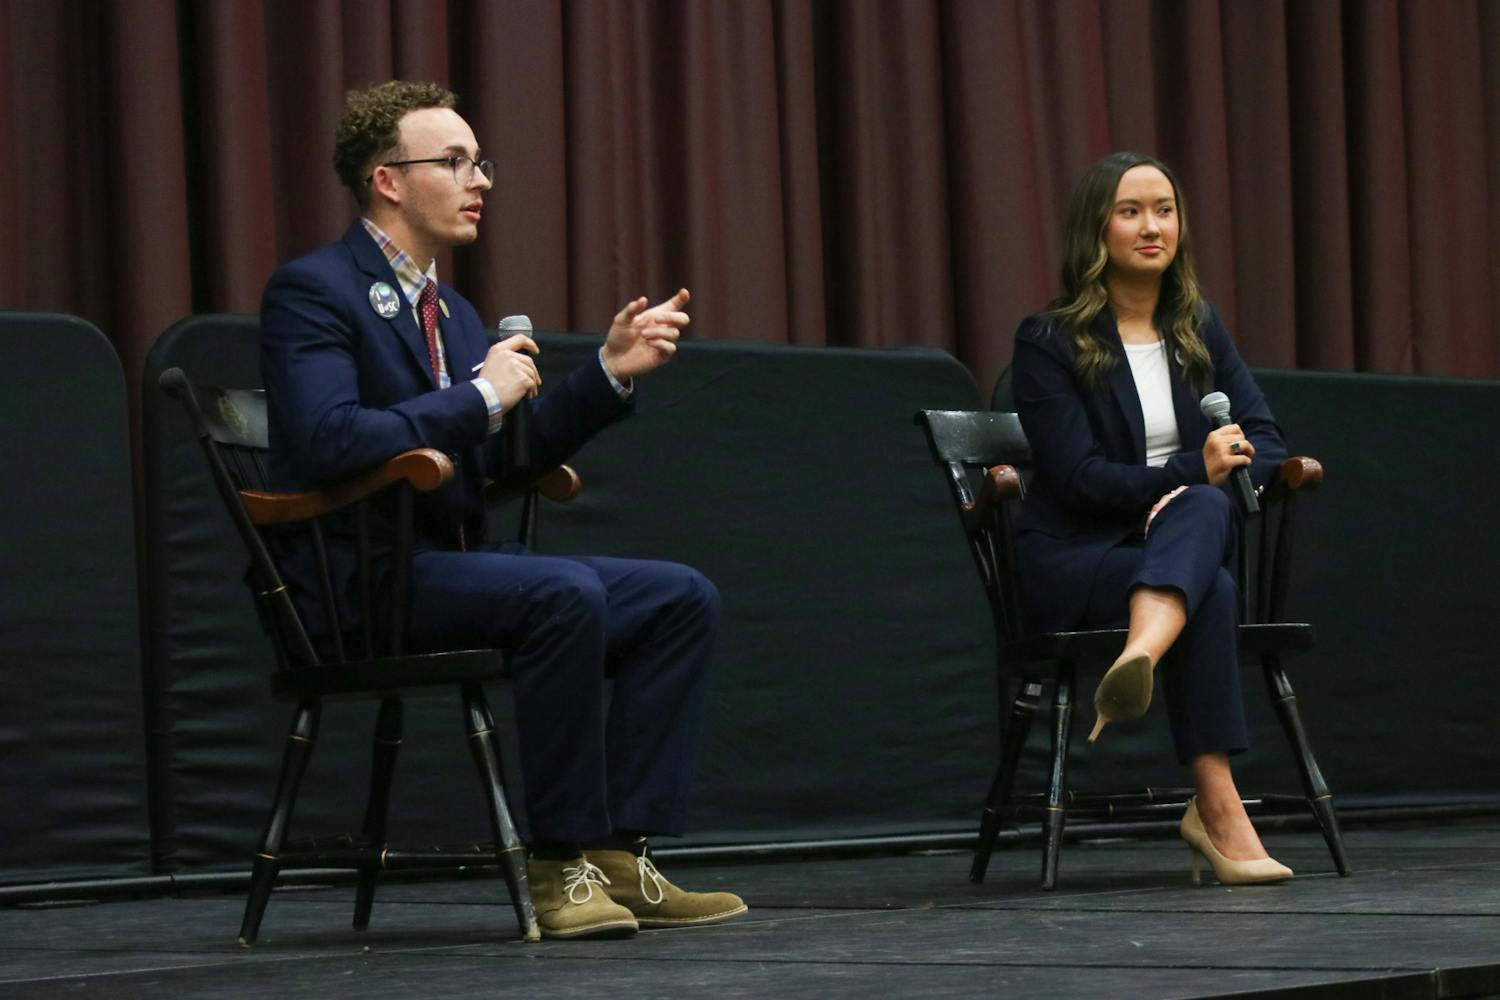 Student body presidential candidates third-year political science student Reilly Arford (left) and third-year public relations student Emily "Emmie" Thompson (right) on stage debating on Feb. 15, 2023. They are the only two presidential candidates this election 鶹С򽴫ý.&nbsp;